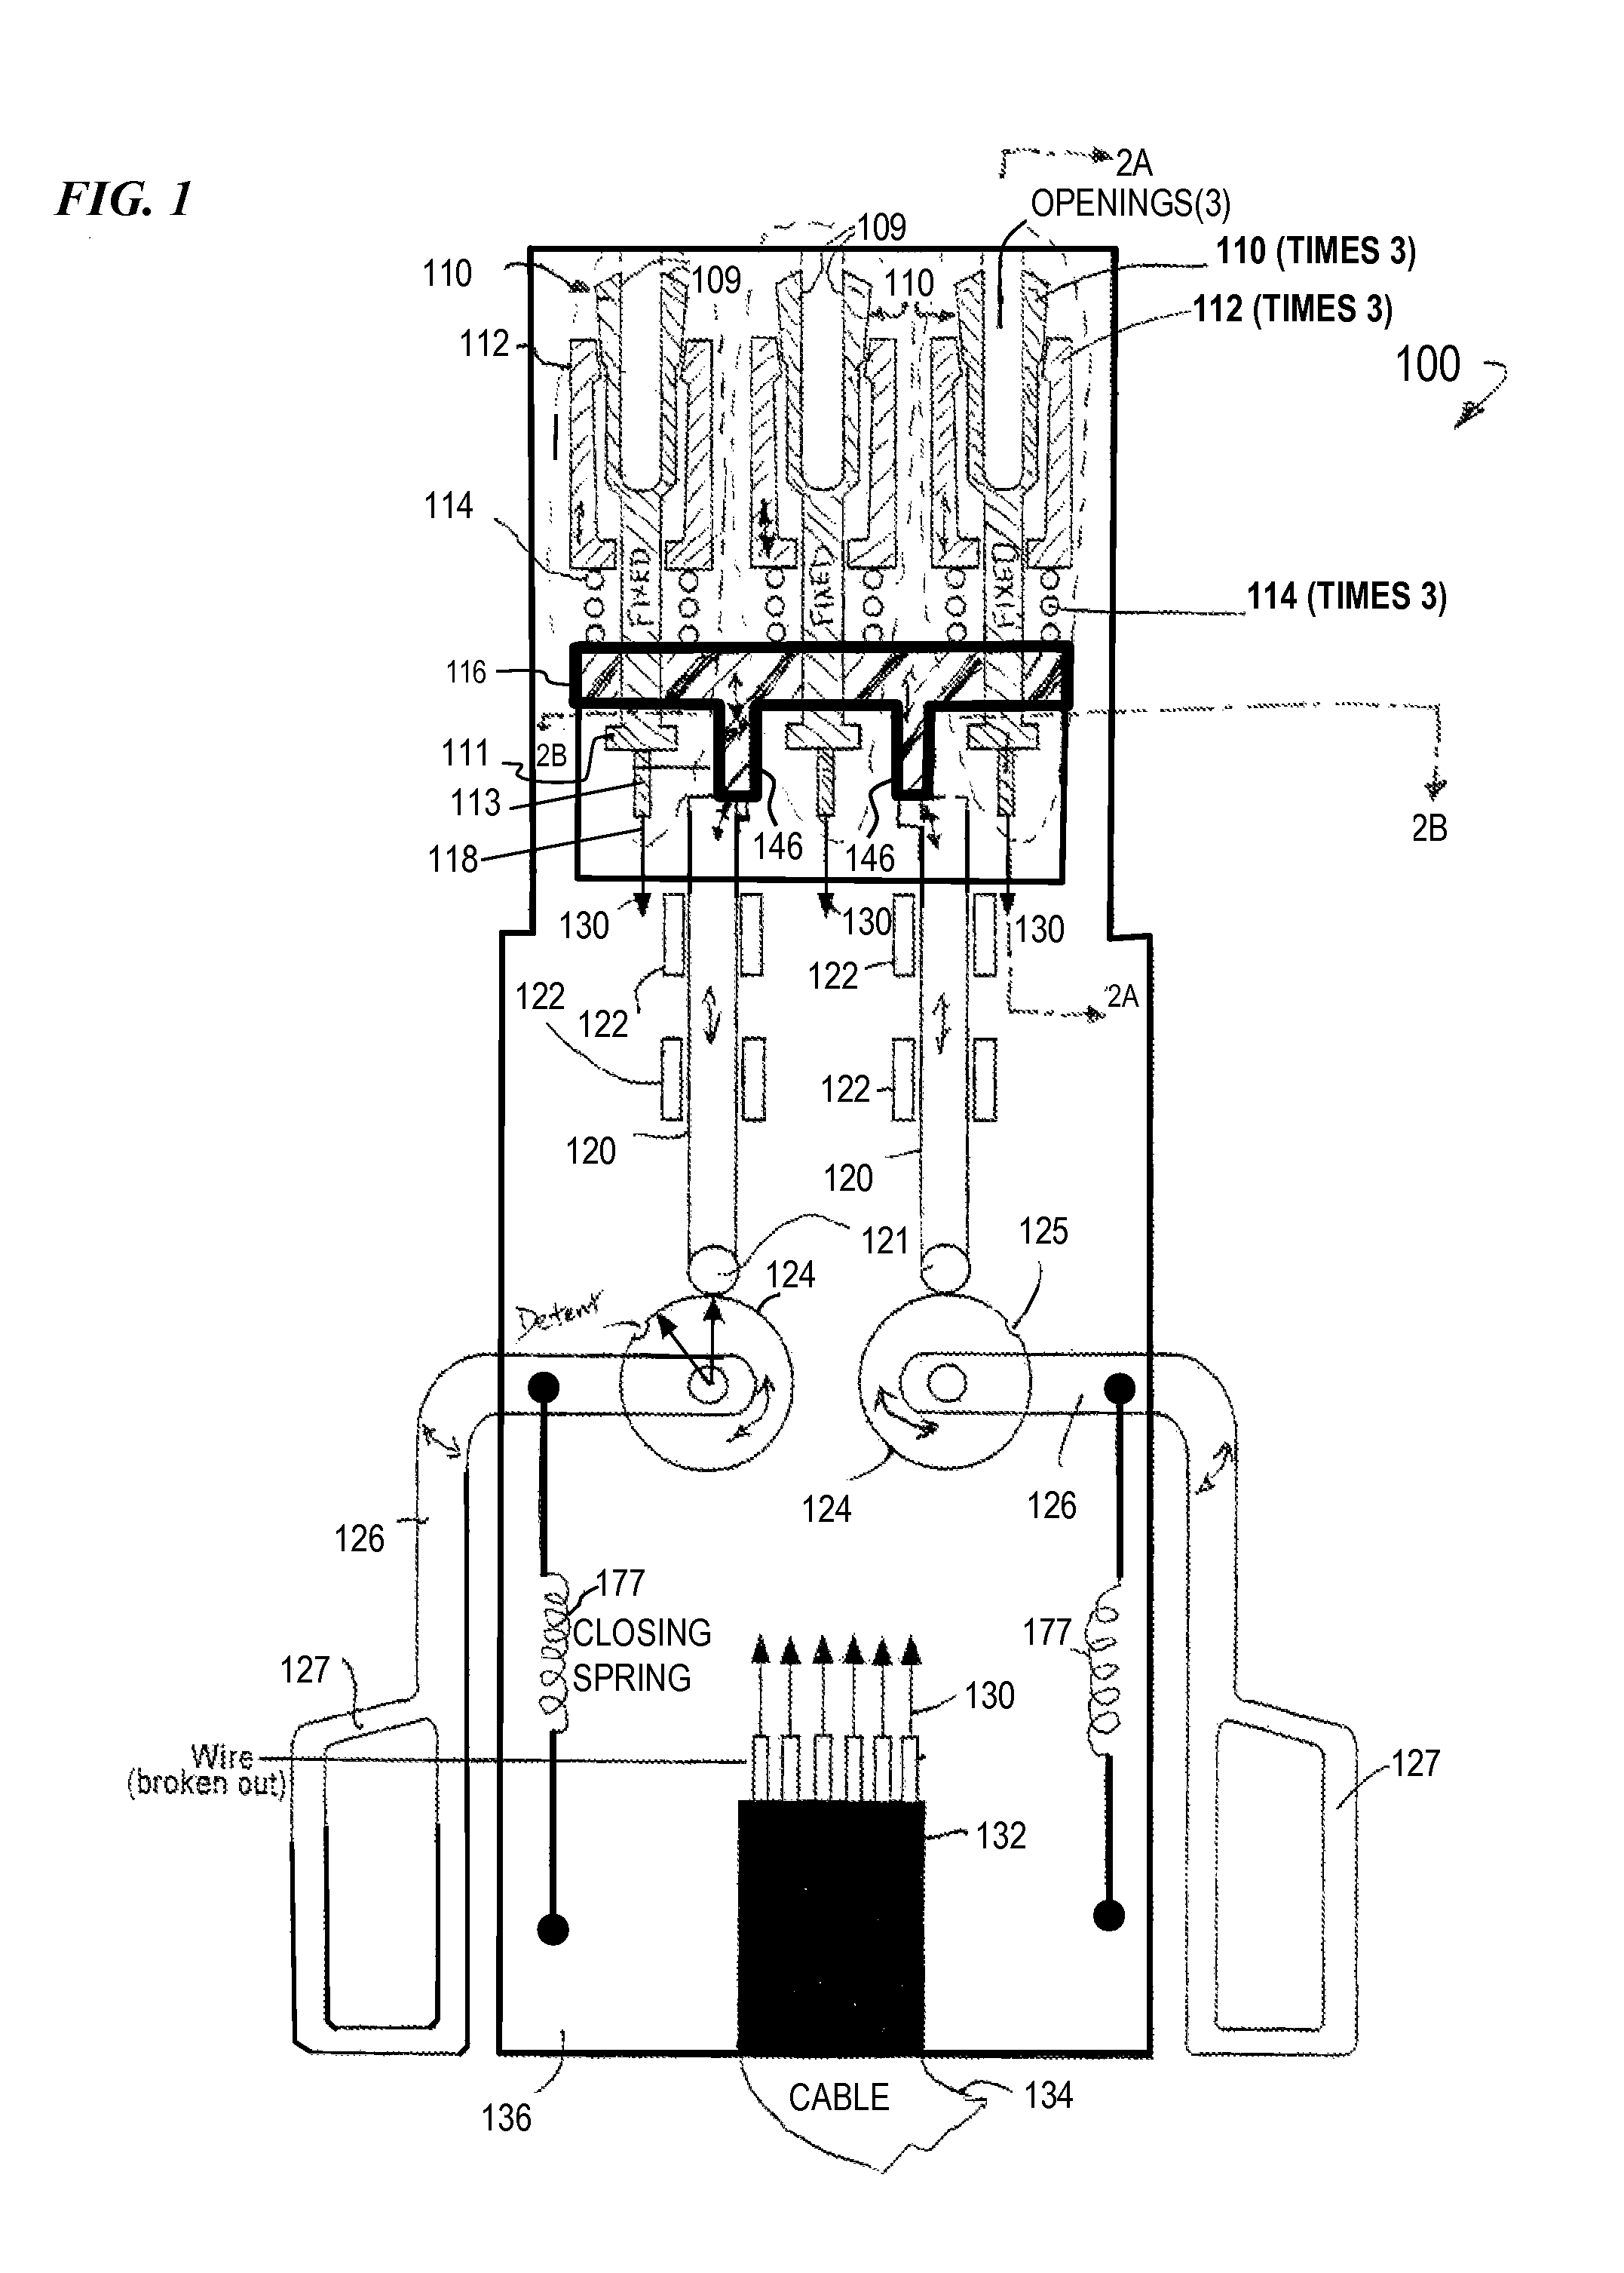 Method and apparatus for power outlet and plug having low-insertion-force connector